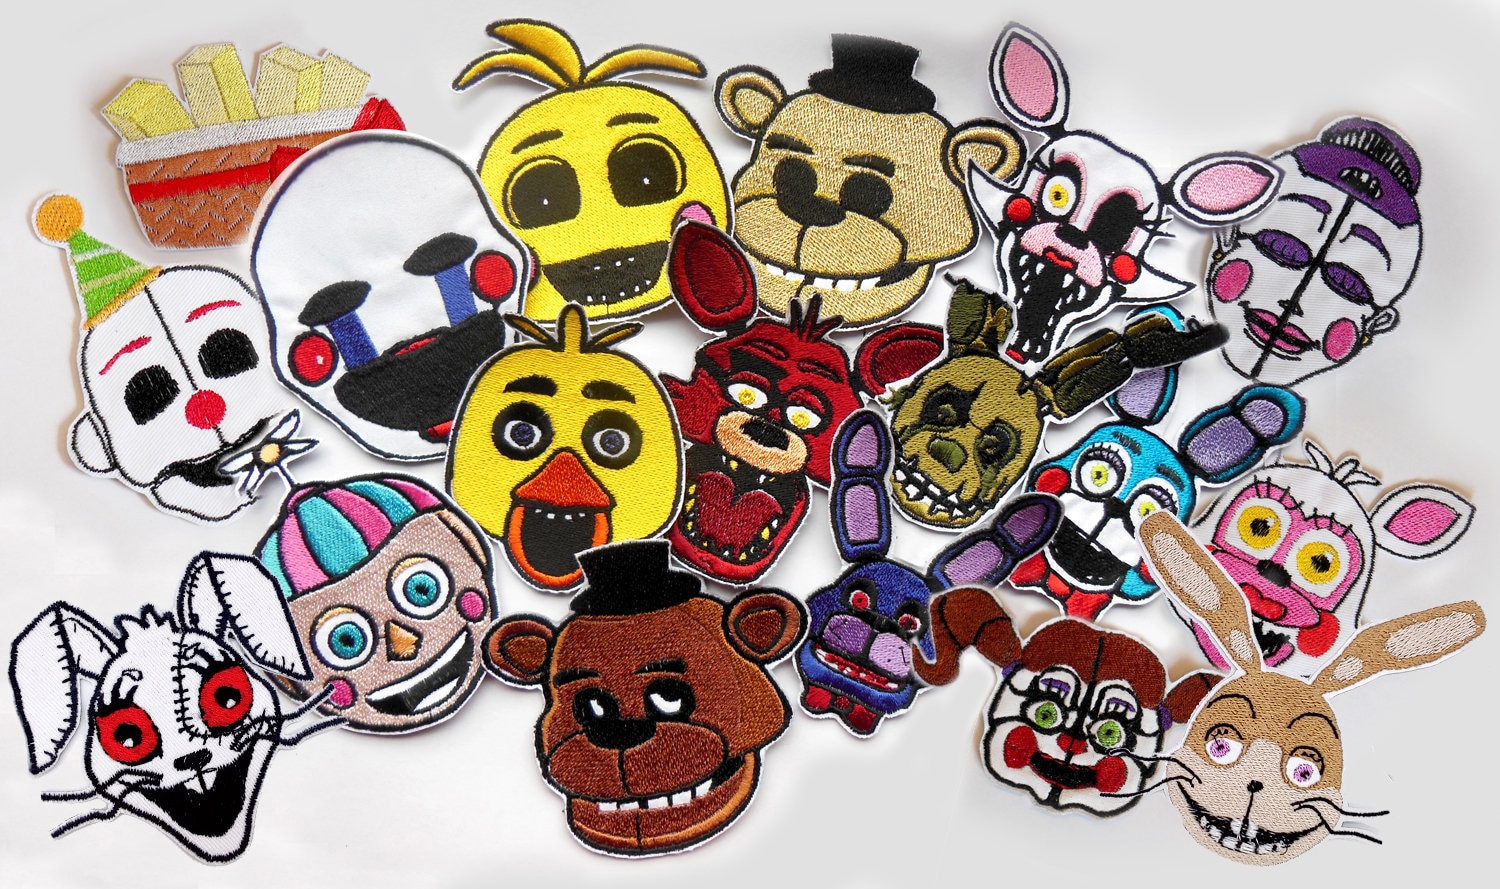 Cheap Fnaf Ucn Fredbear Ultimate Custom Night Five Nights At Freddy's 4  Iron-on Transfers For Clothing Tshirt Bag Heat Transfer Stickers Iron On  Patches